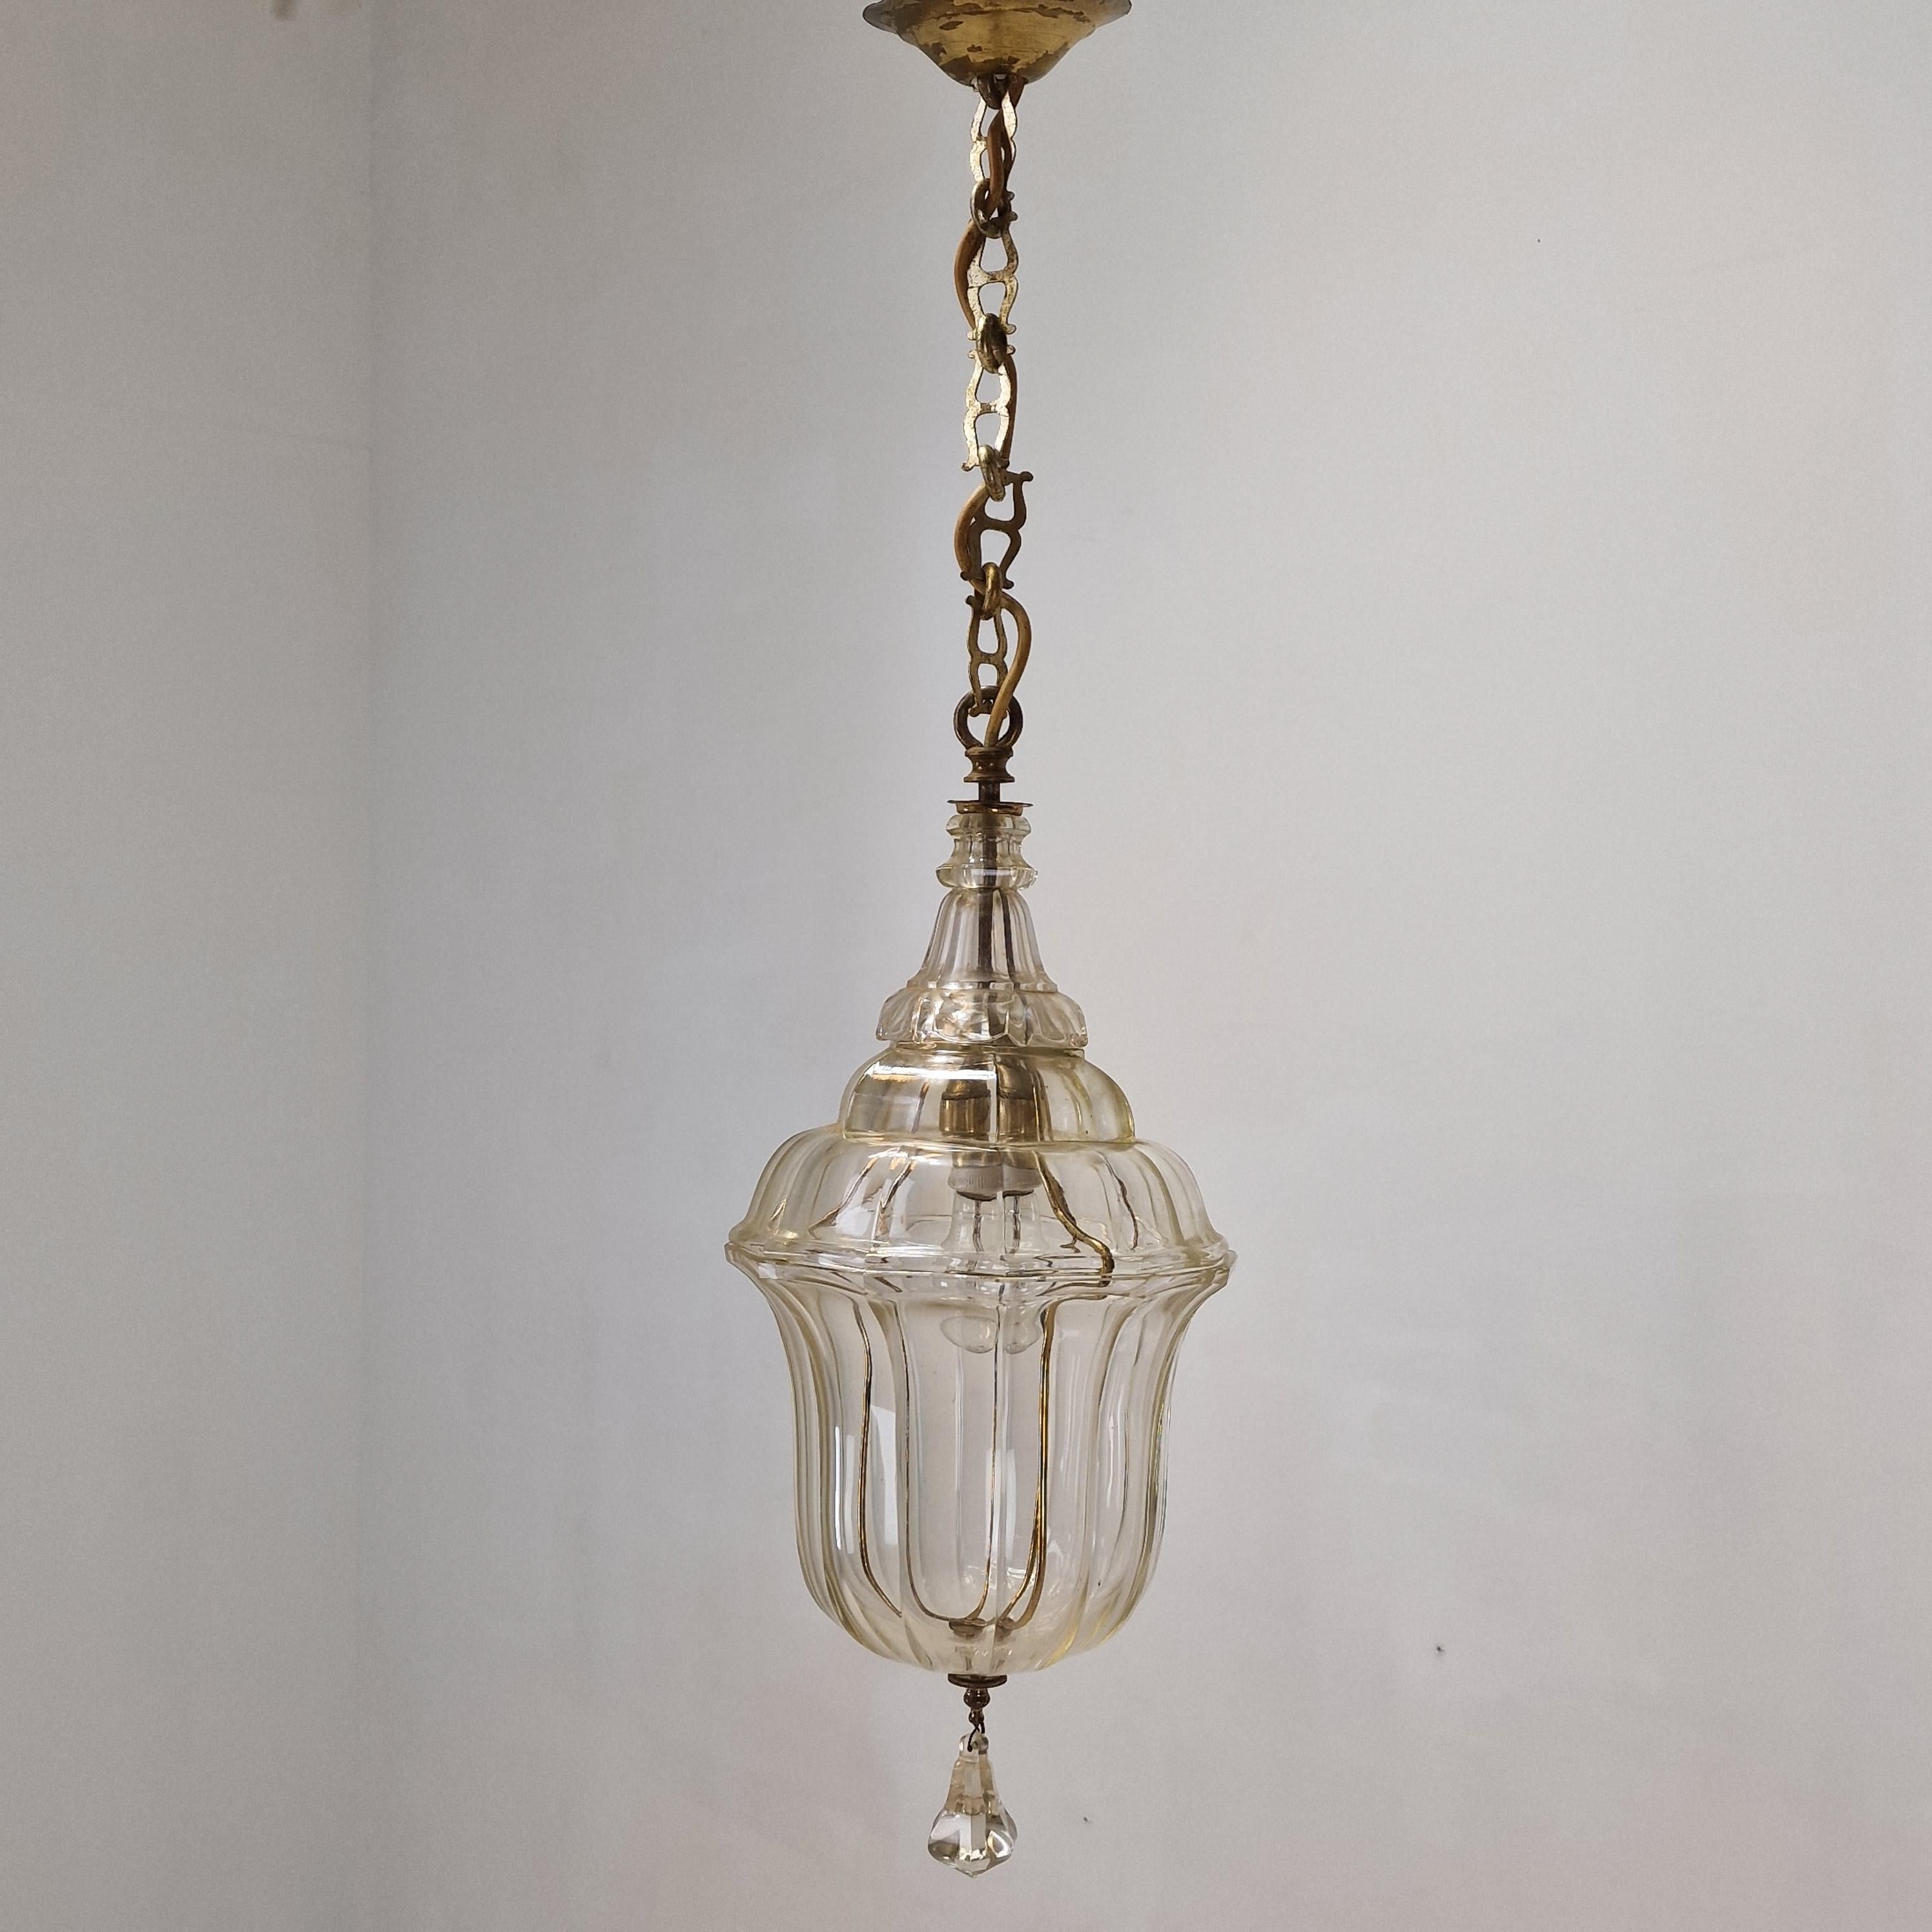 Italian Cut Crystal Hanging Lantern or Lamp, 1900 In Good Condition For Sale In Oud Beijerland, NL